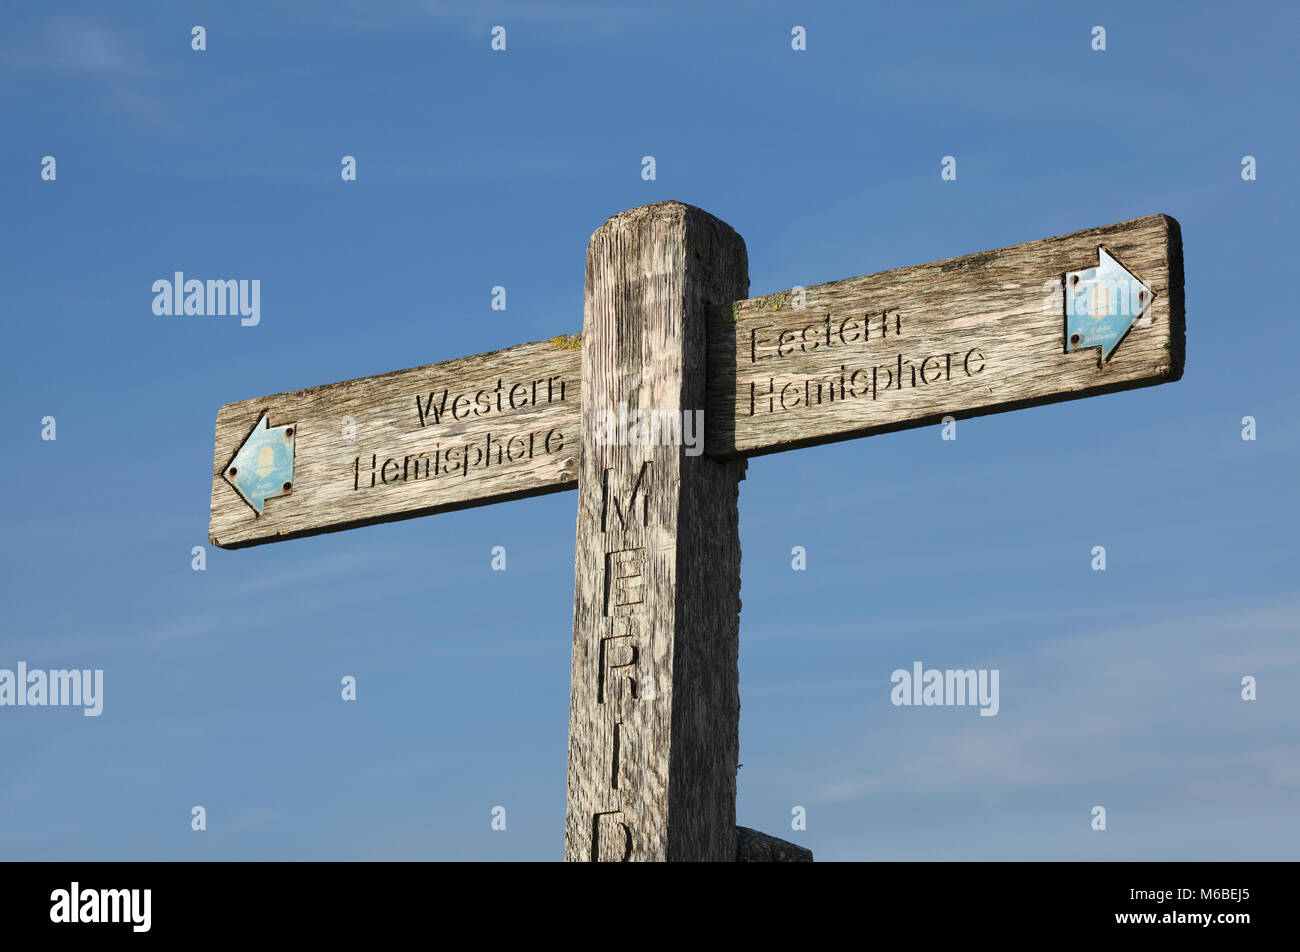 A wooden signpost on the South Downs marking the Greenwich Meridian. It points left to the 'Western Hemisphere' and right to the 'Eastern Hemisphere'. Stock Photo